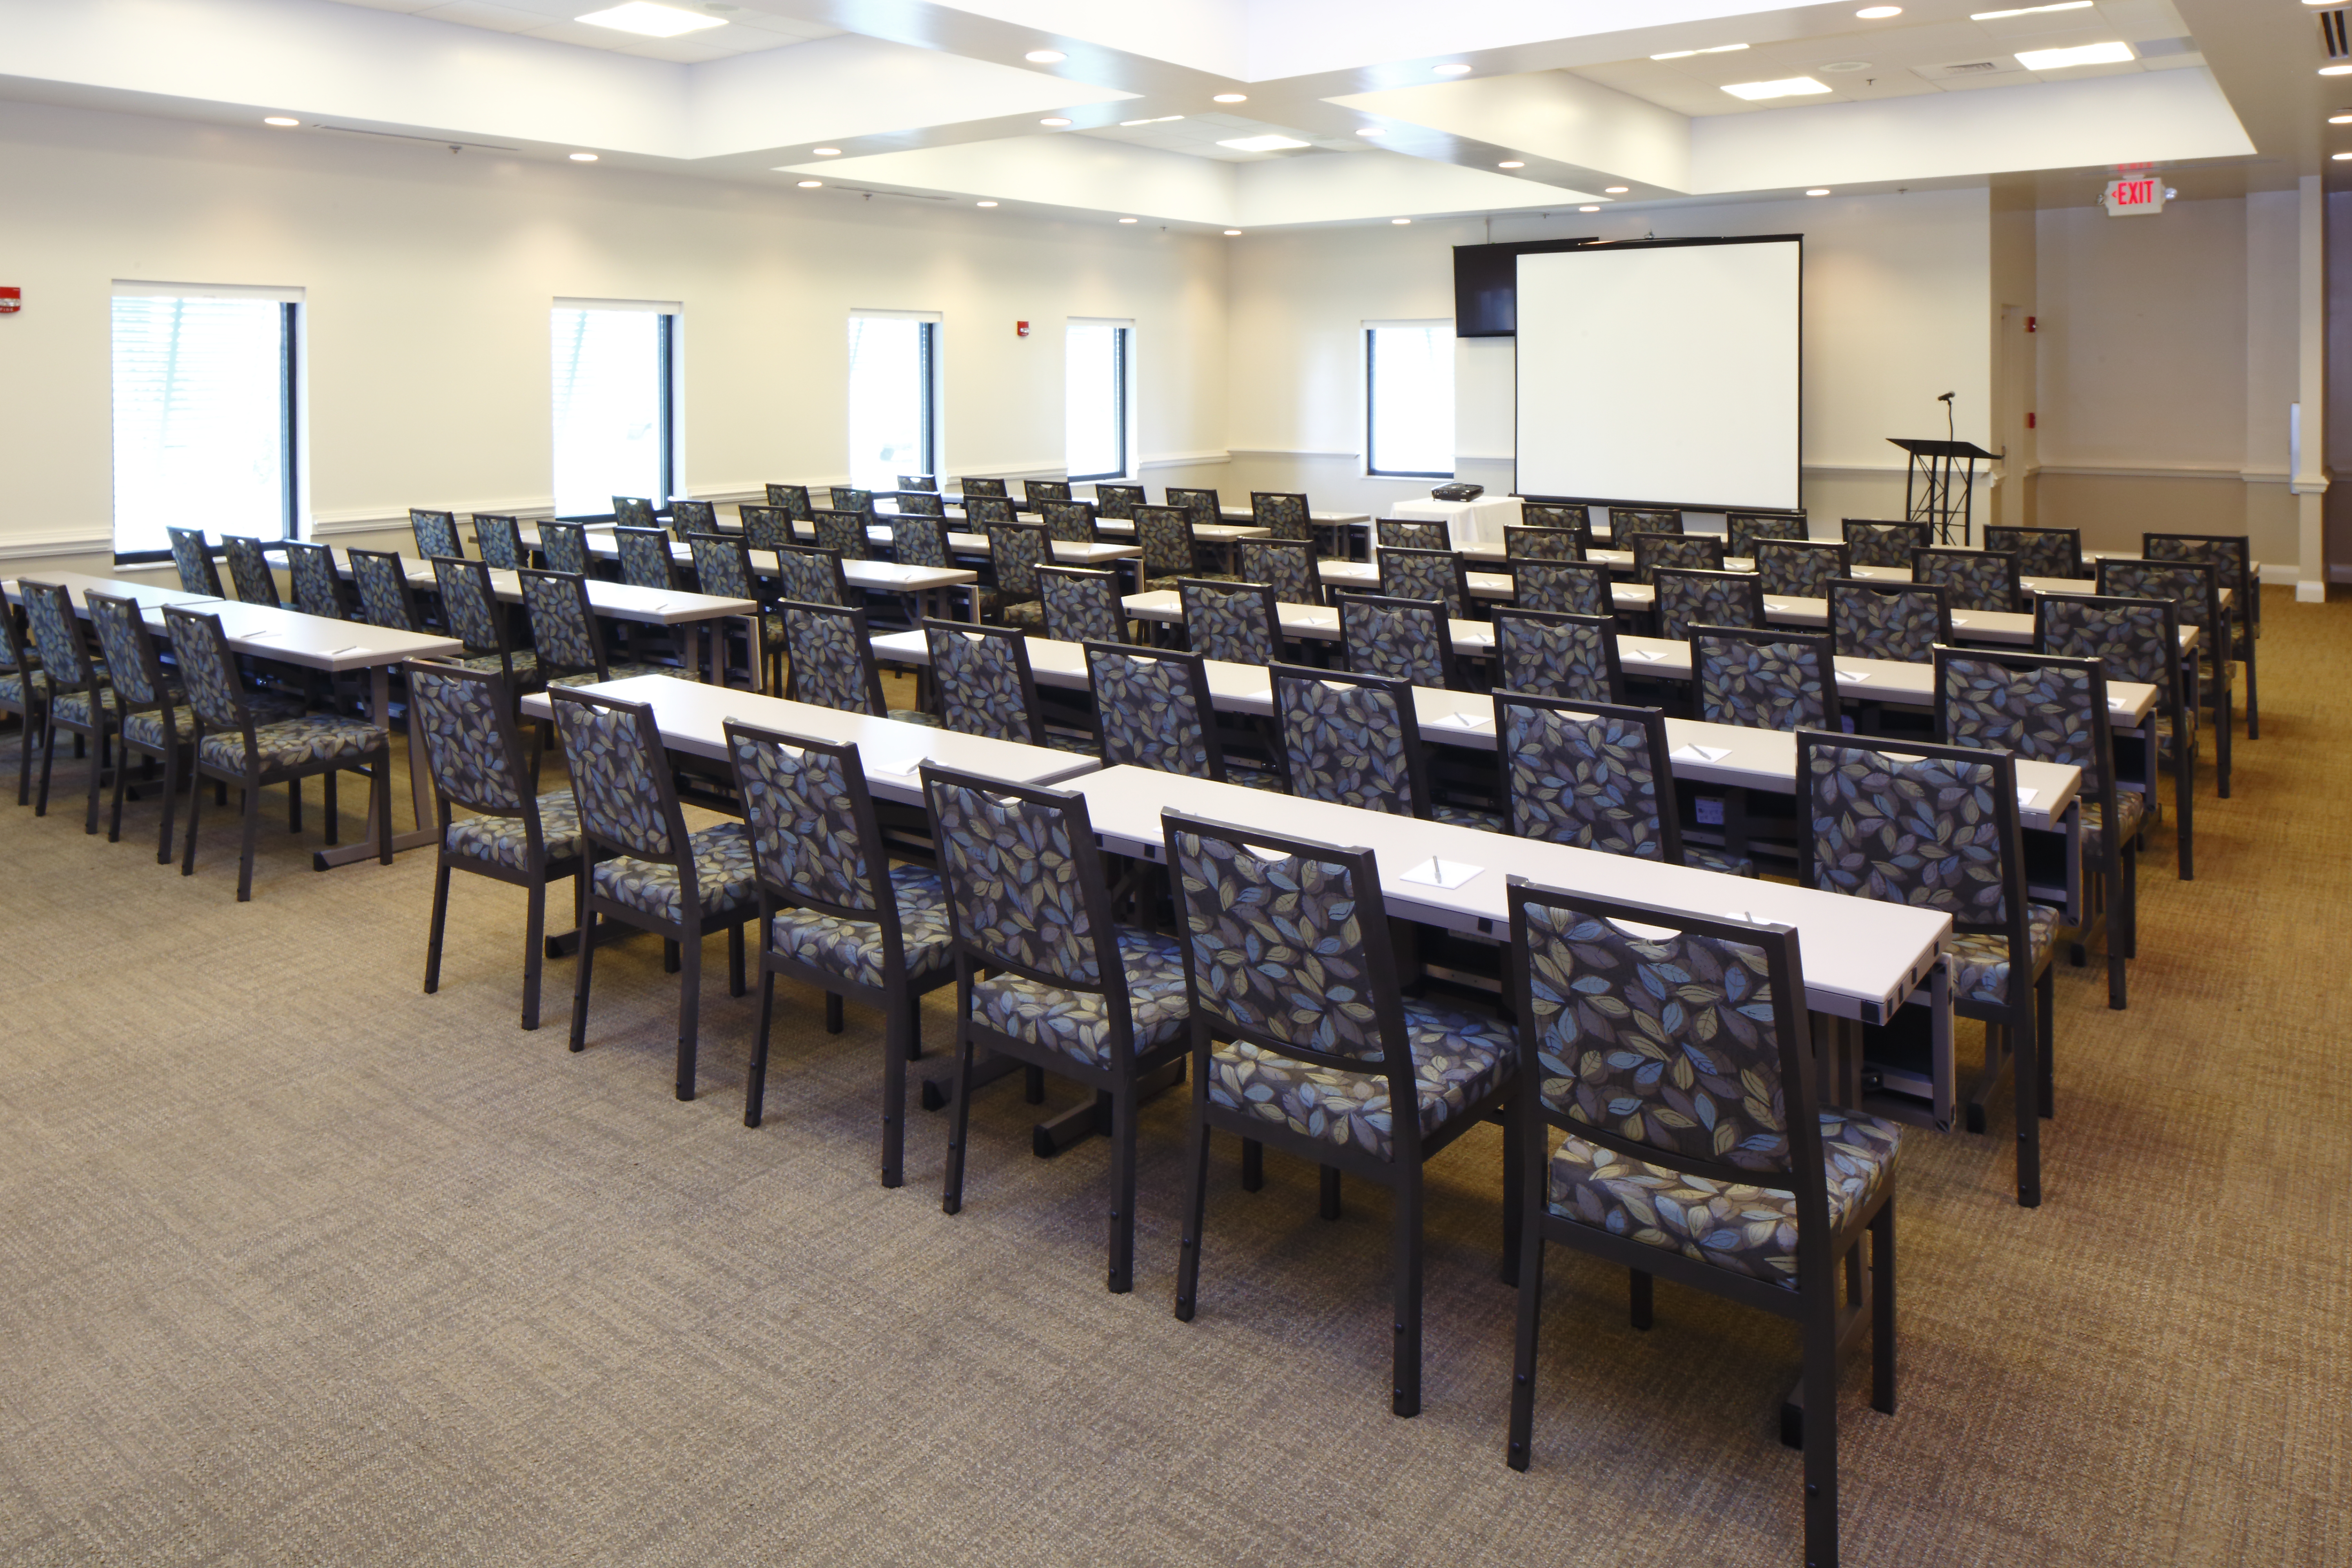 Classroom Setup in Meeting Room With Windows, Tables, Chairs, Presentation Screen, and Podium